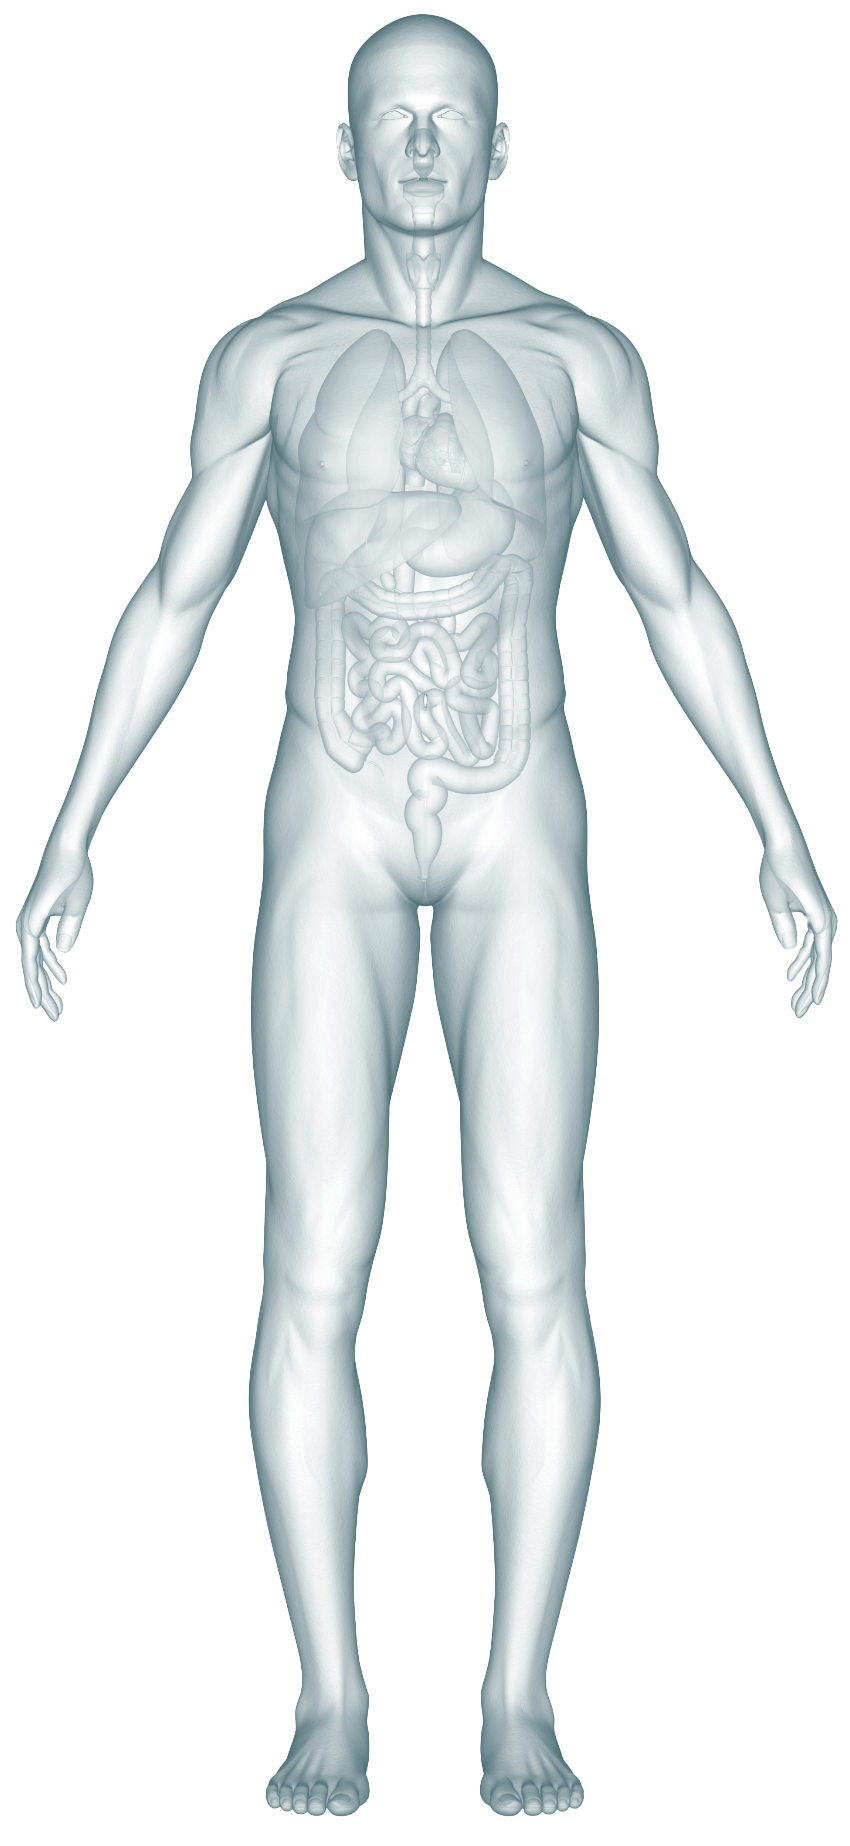 body map male image showing major organs